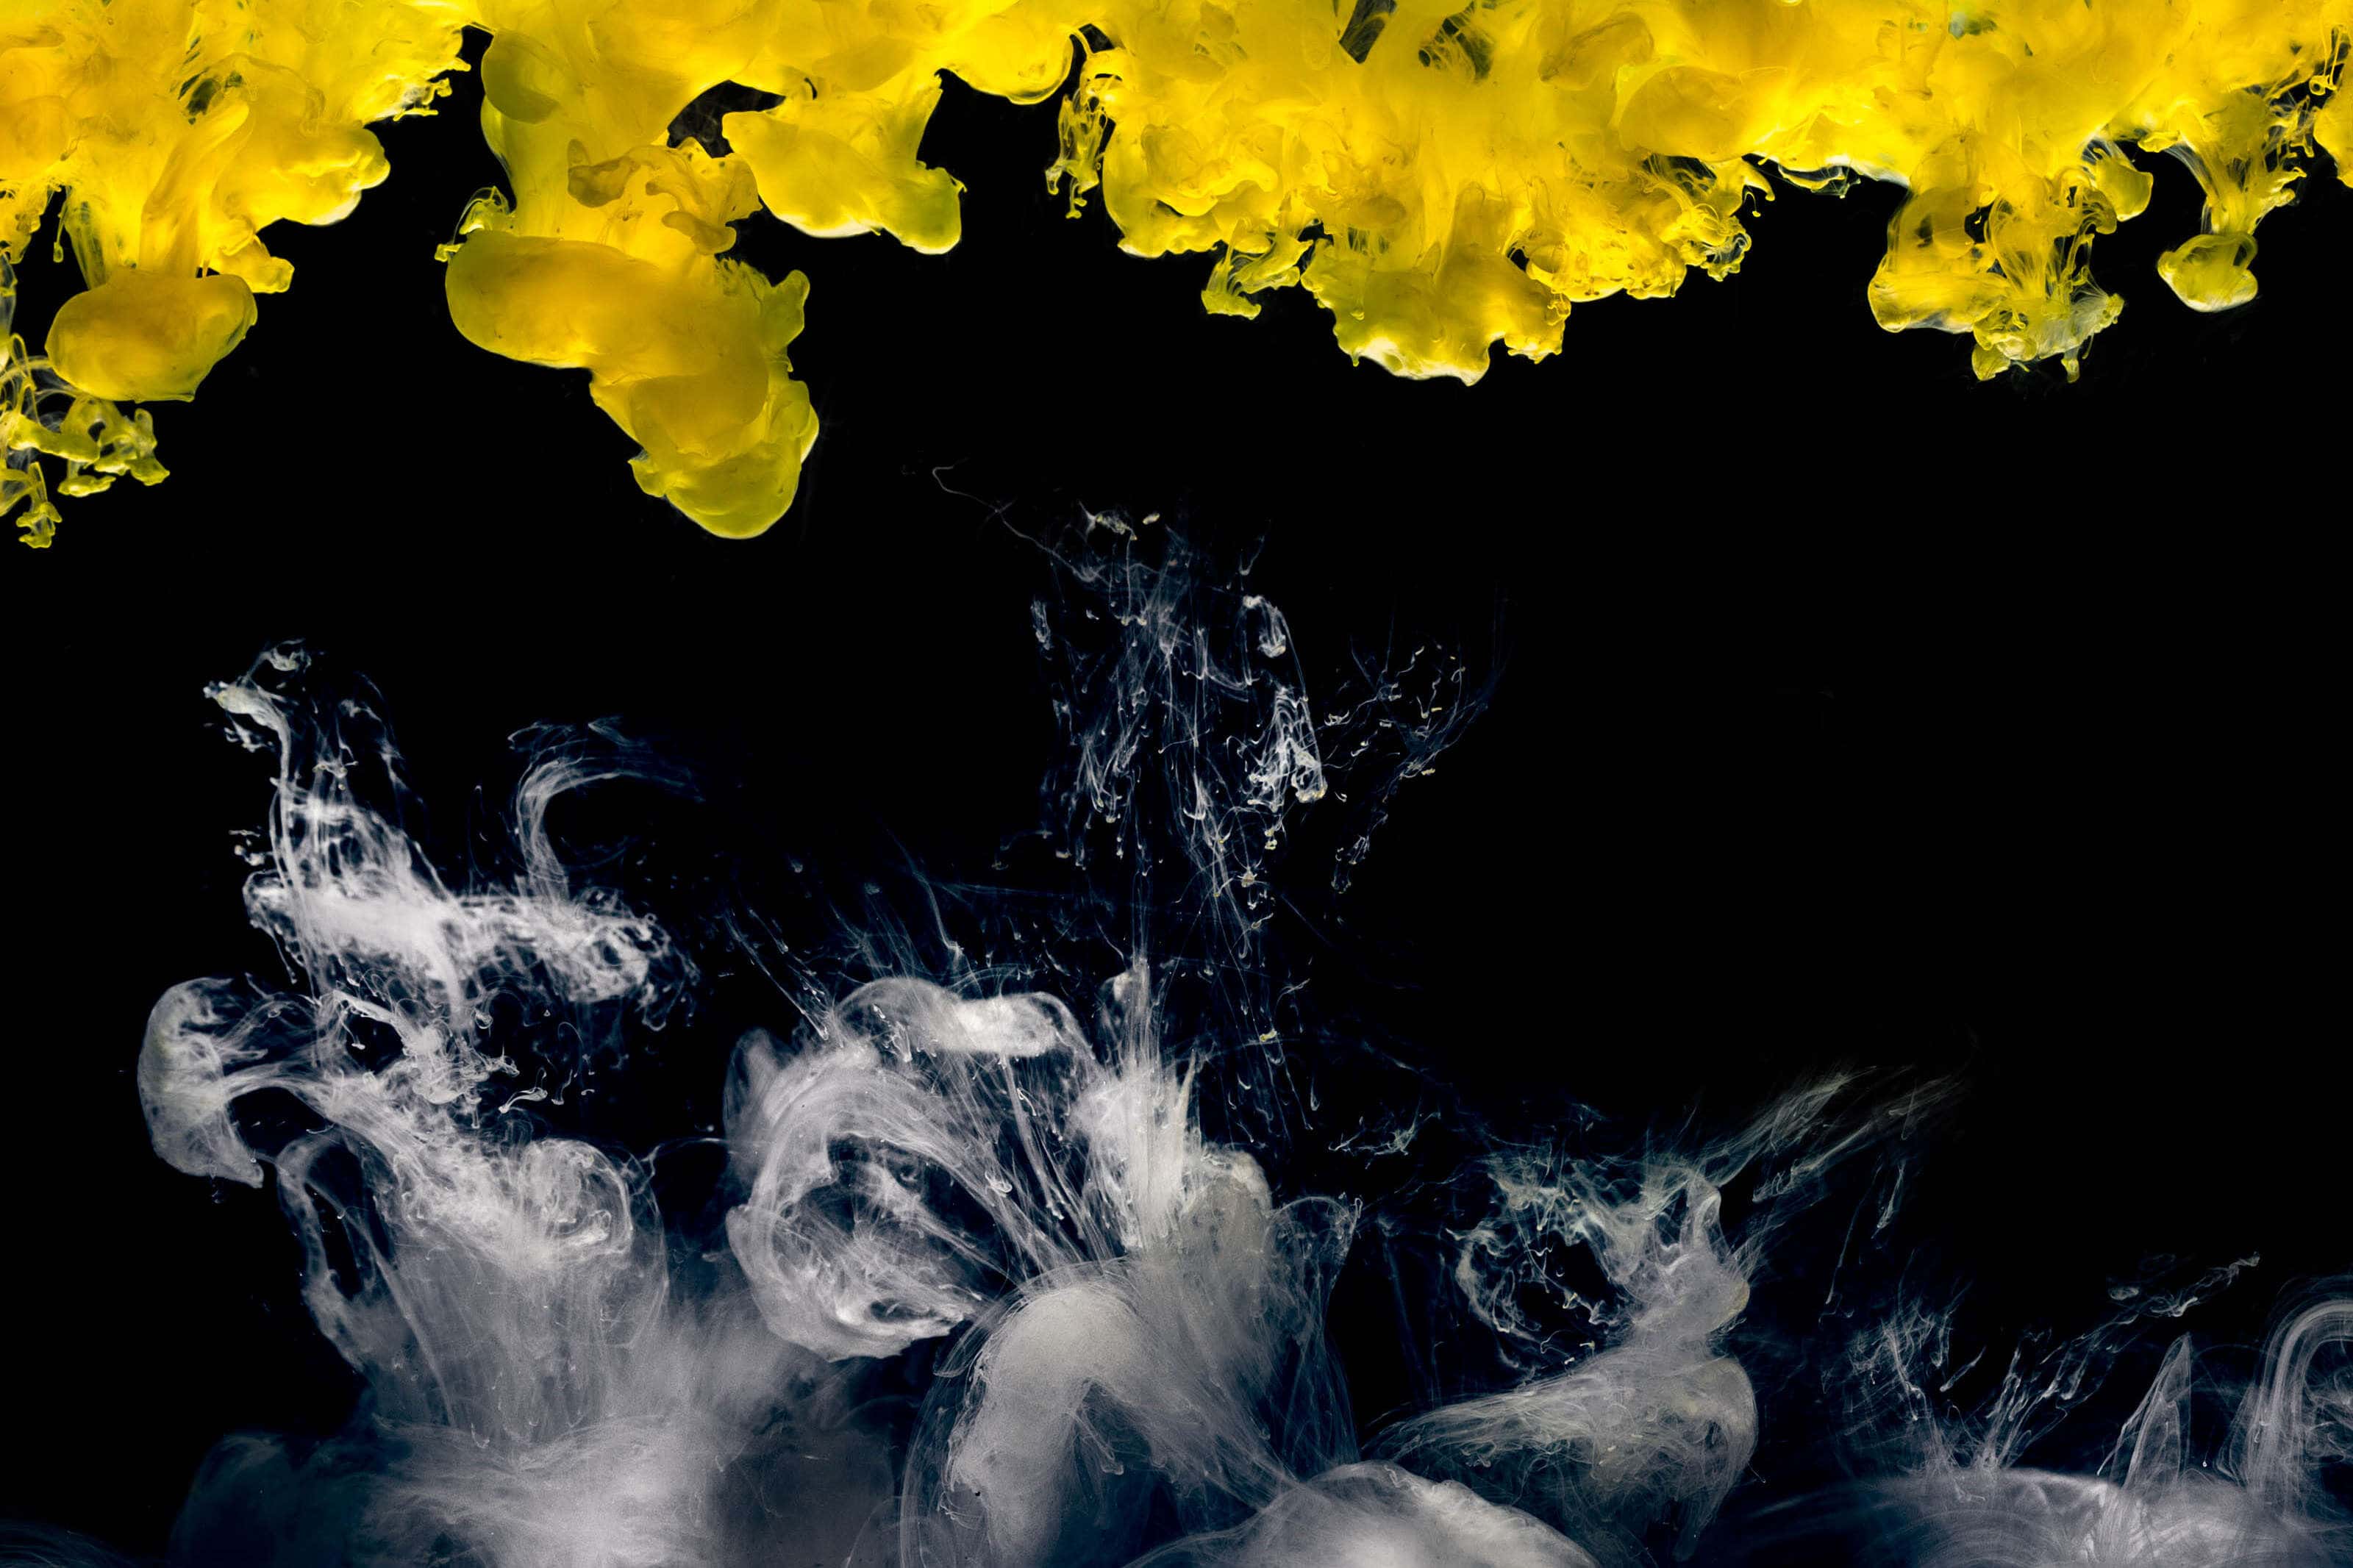 yellow and white clouds in black liquid